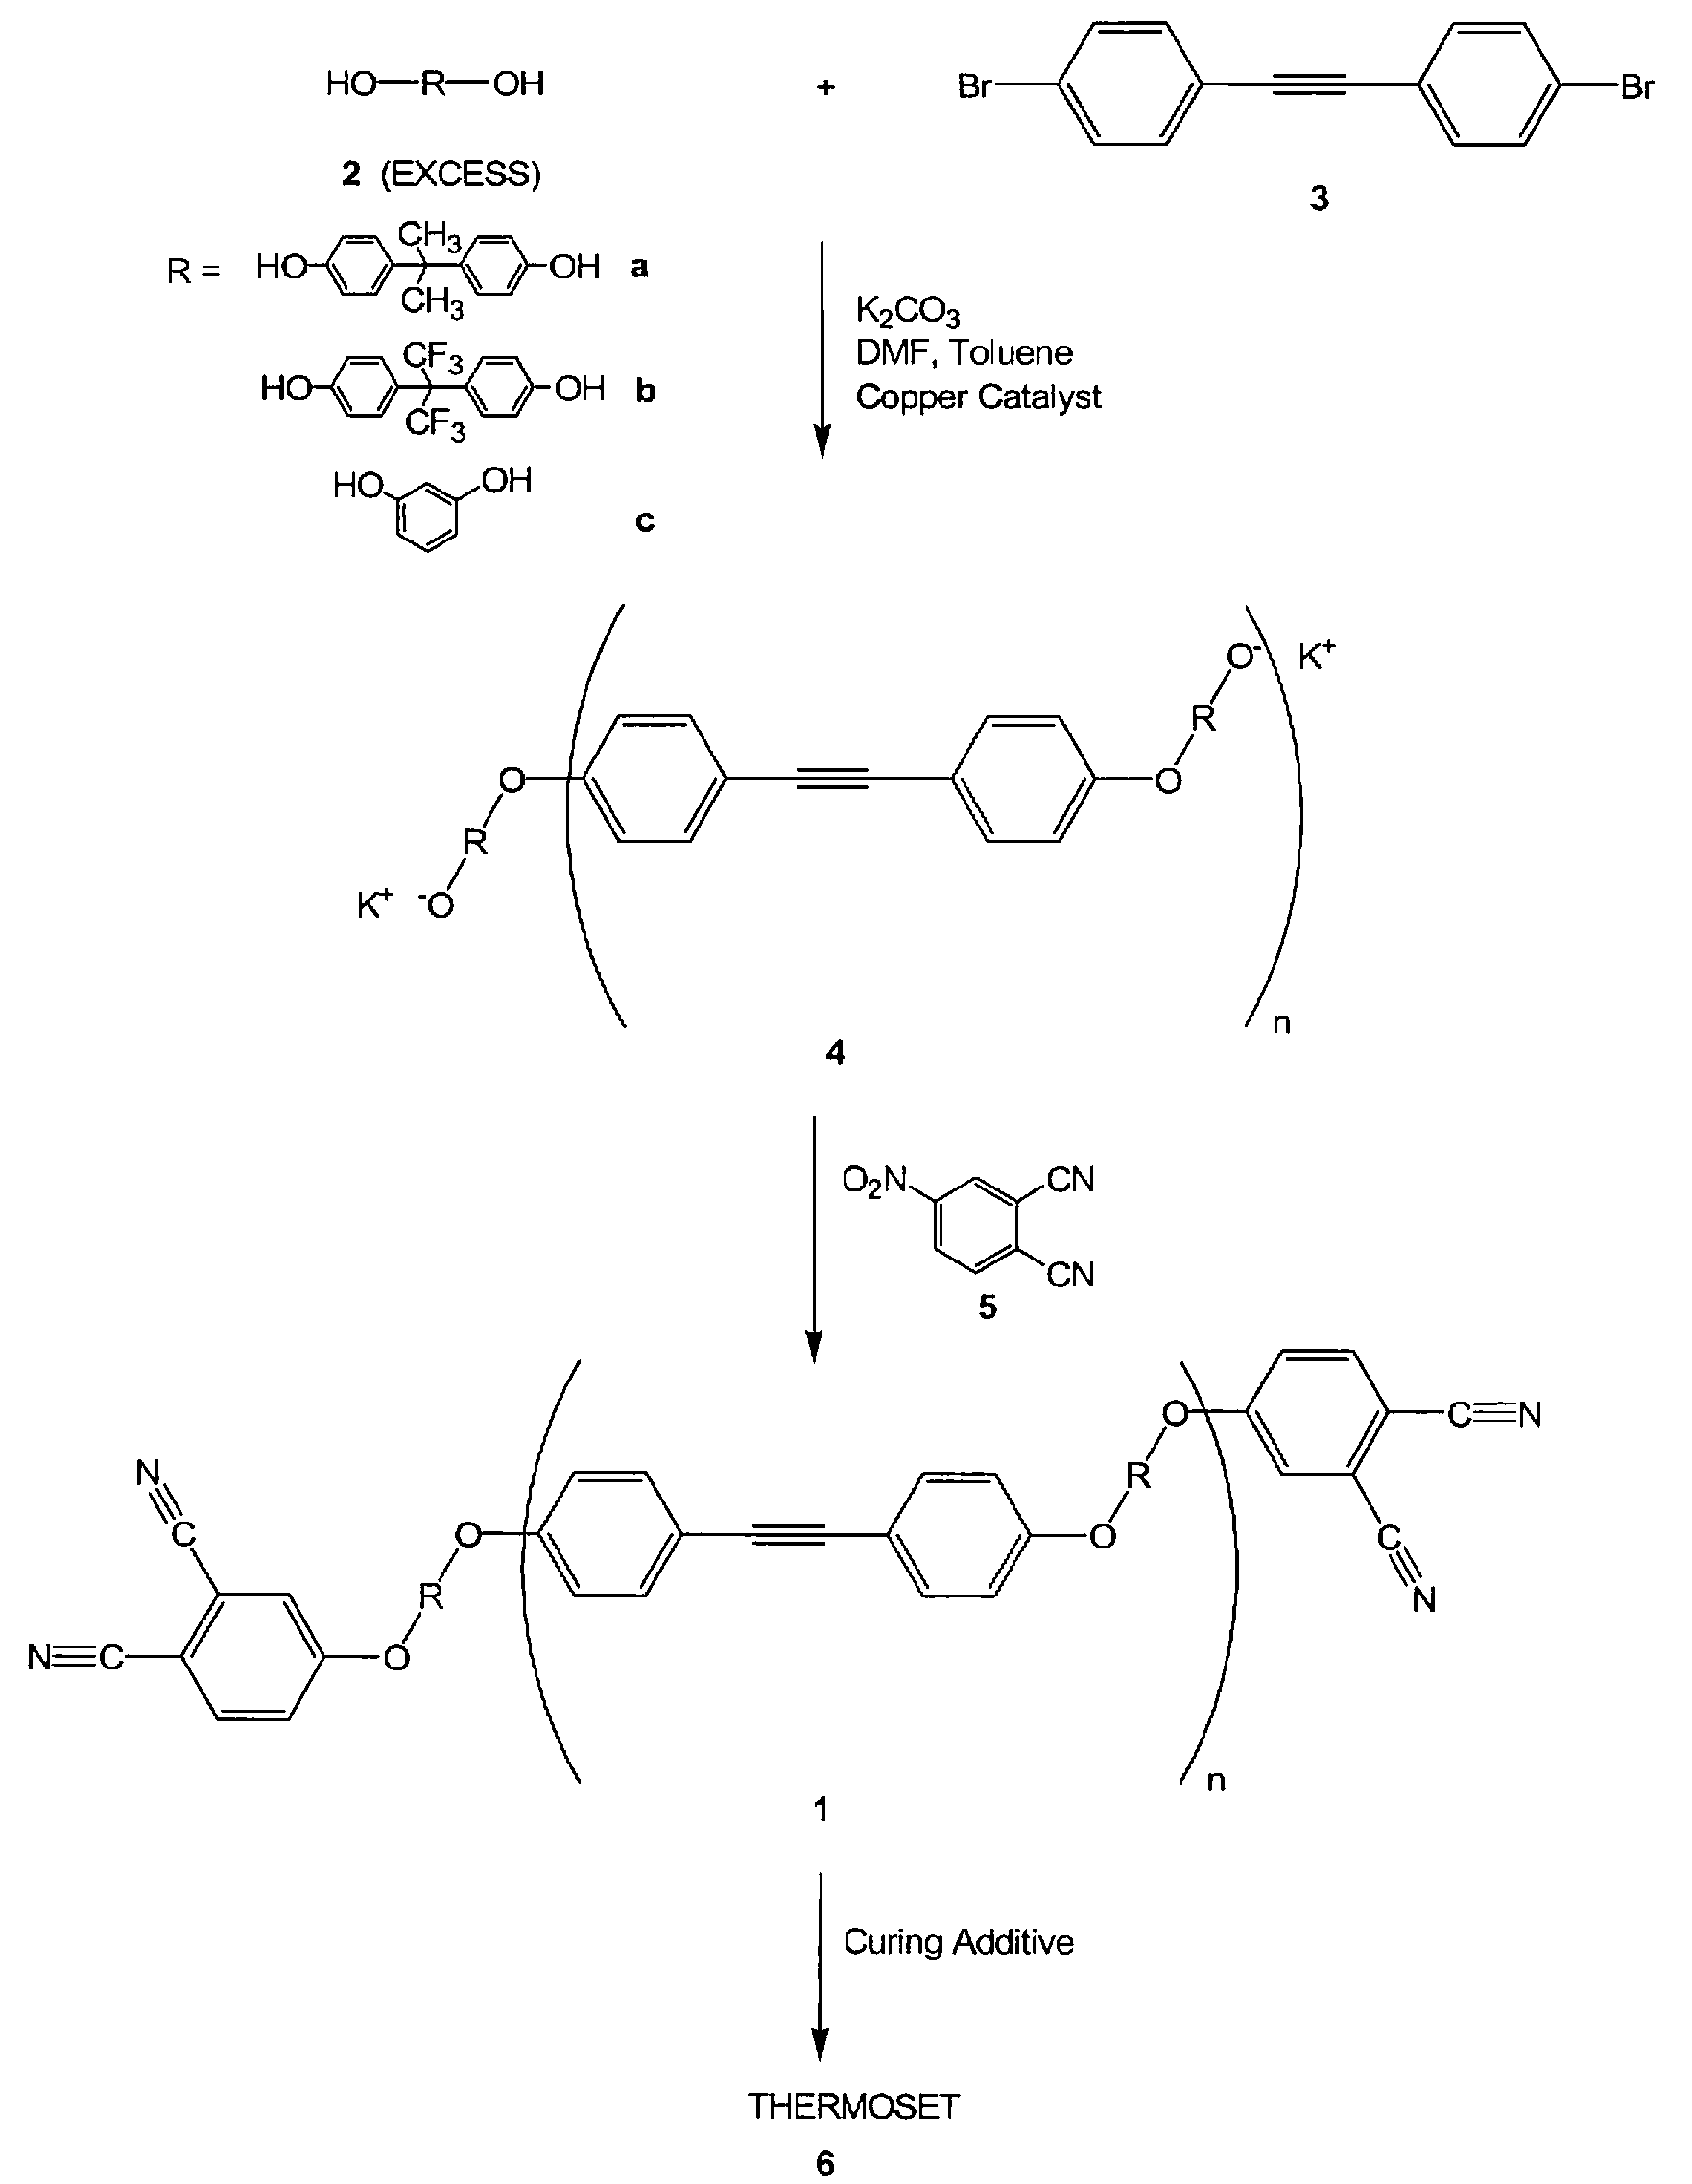 Aromatic ether and alkynyl containing phthalonitriles